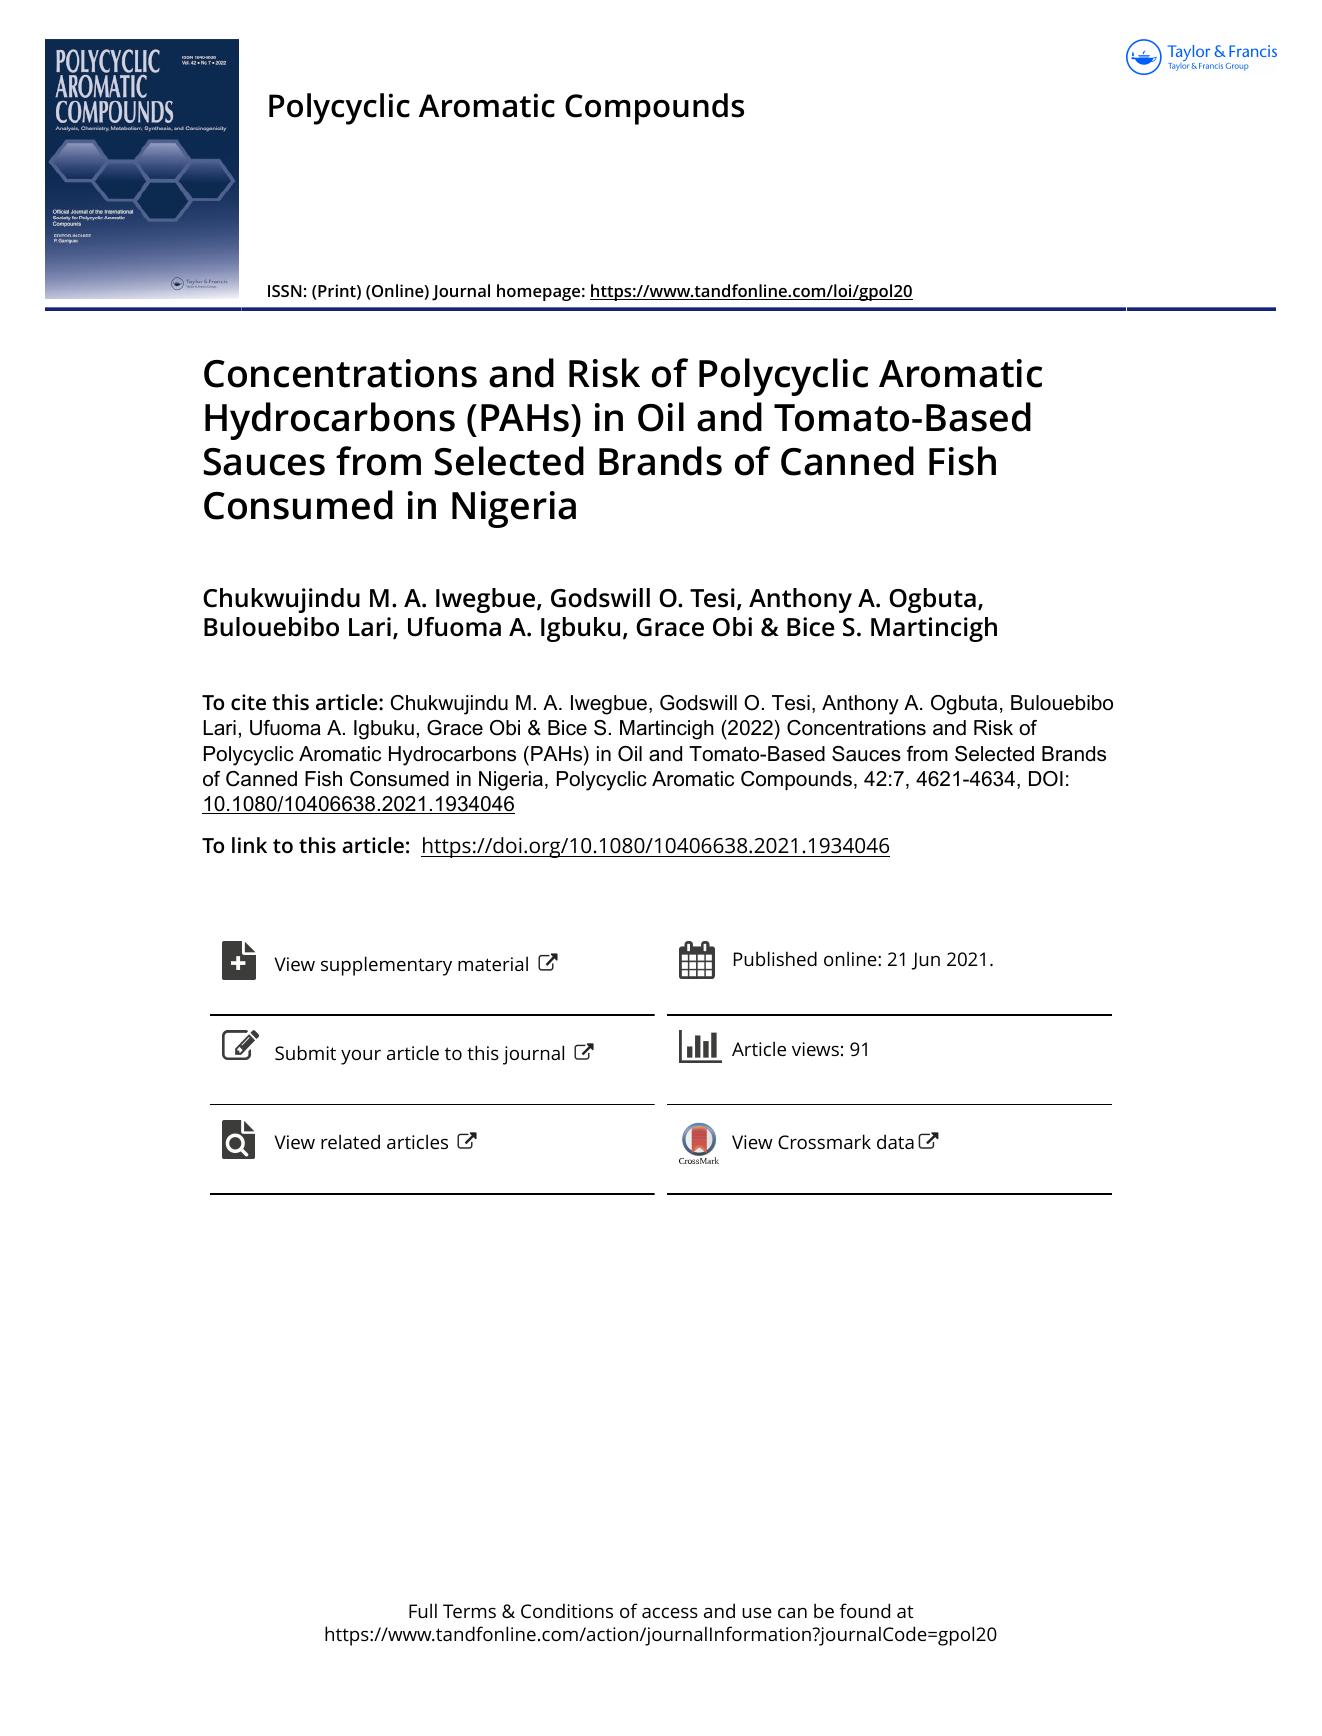 Concentrations and Risk of Polycyclic Aromatic Hydrocarbons (PAHs) in Oil and Tomato-Based Sauces from Selected Brands of Canned Fish Consumed in Nigeria by unknow